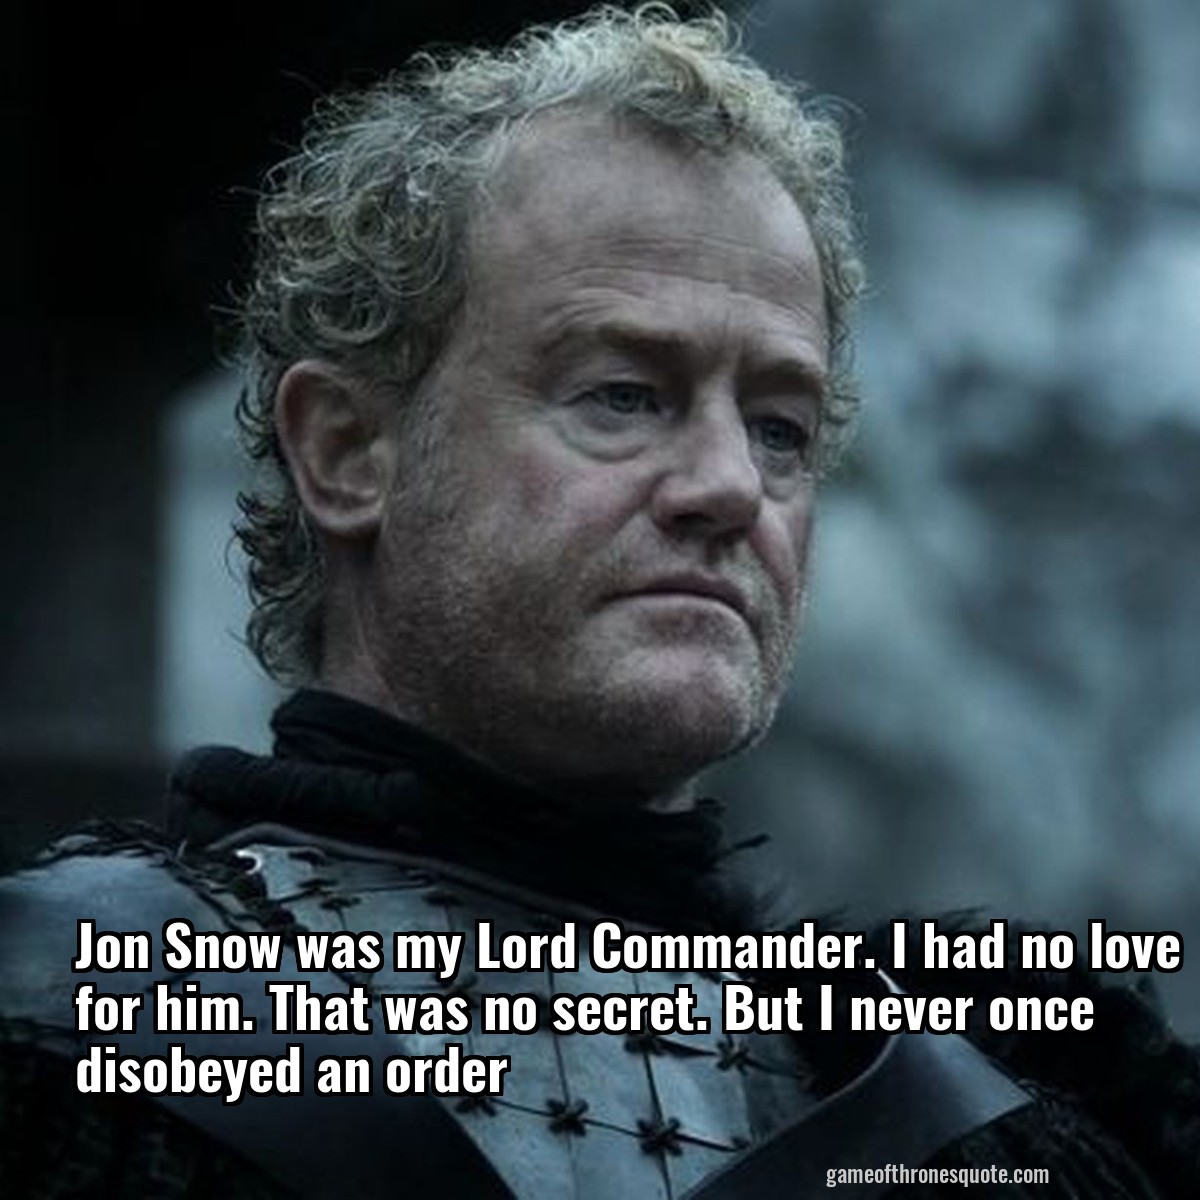 Jon Snow was my Lord Commander. I had no love for him. That was no secret. But I never once disobeyed an order